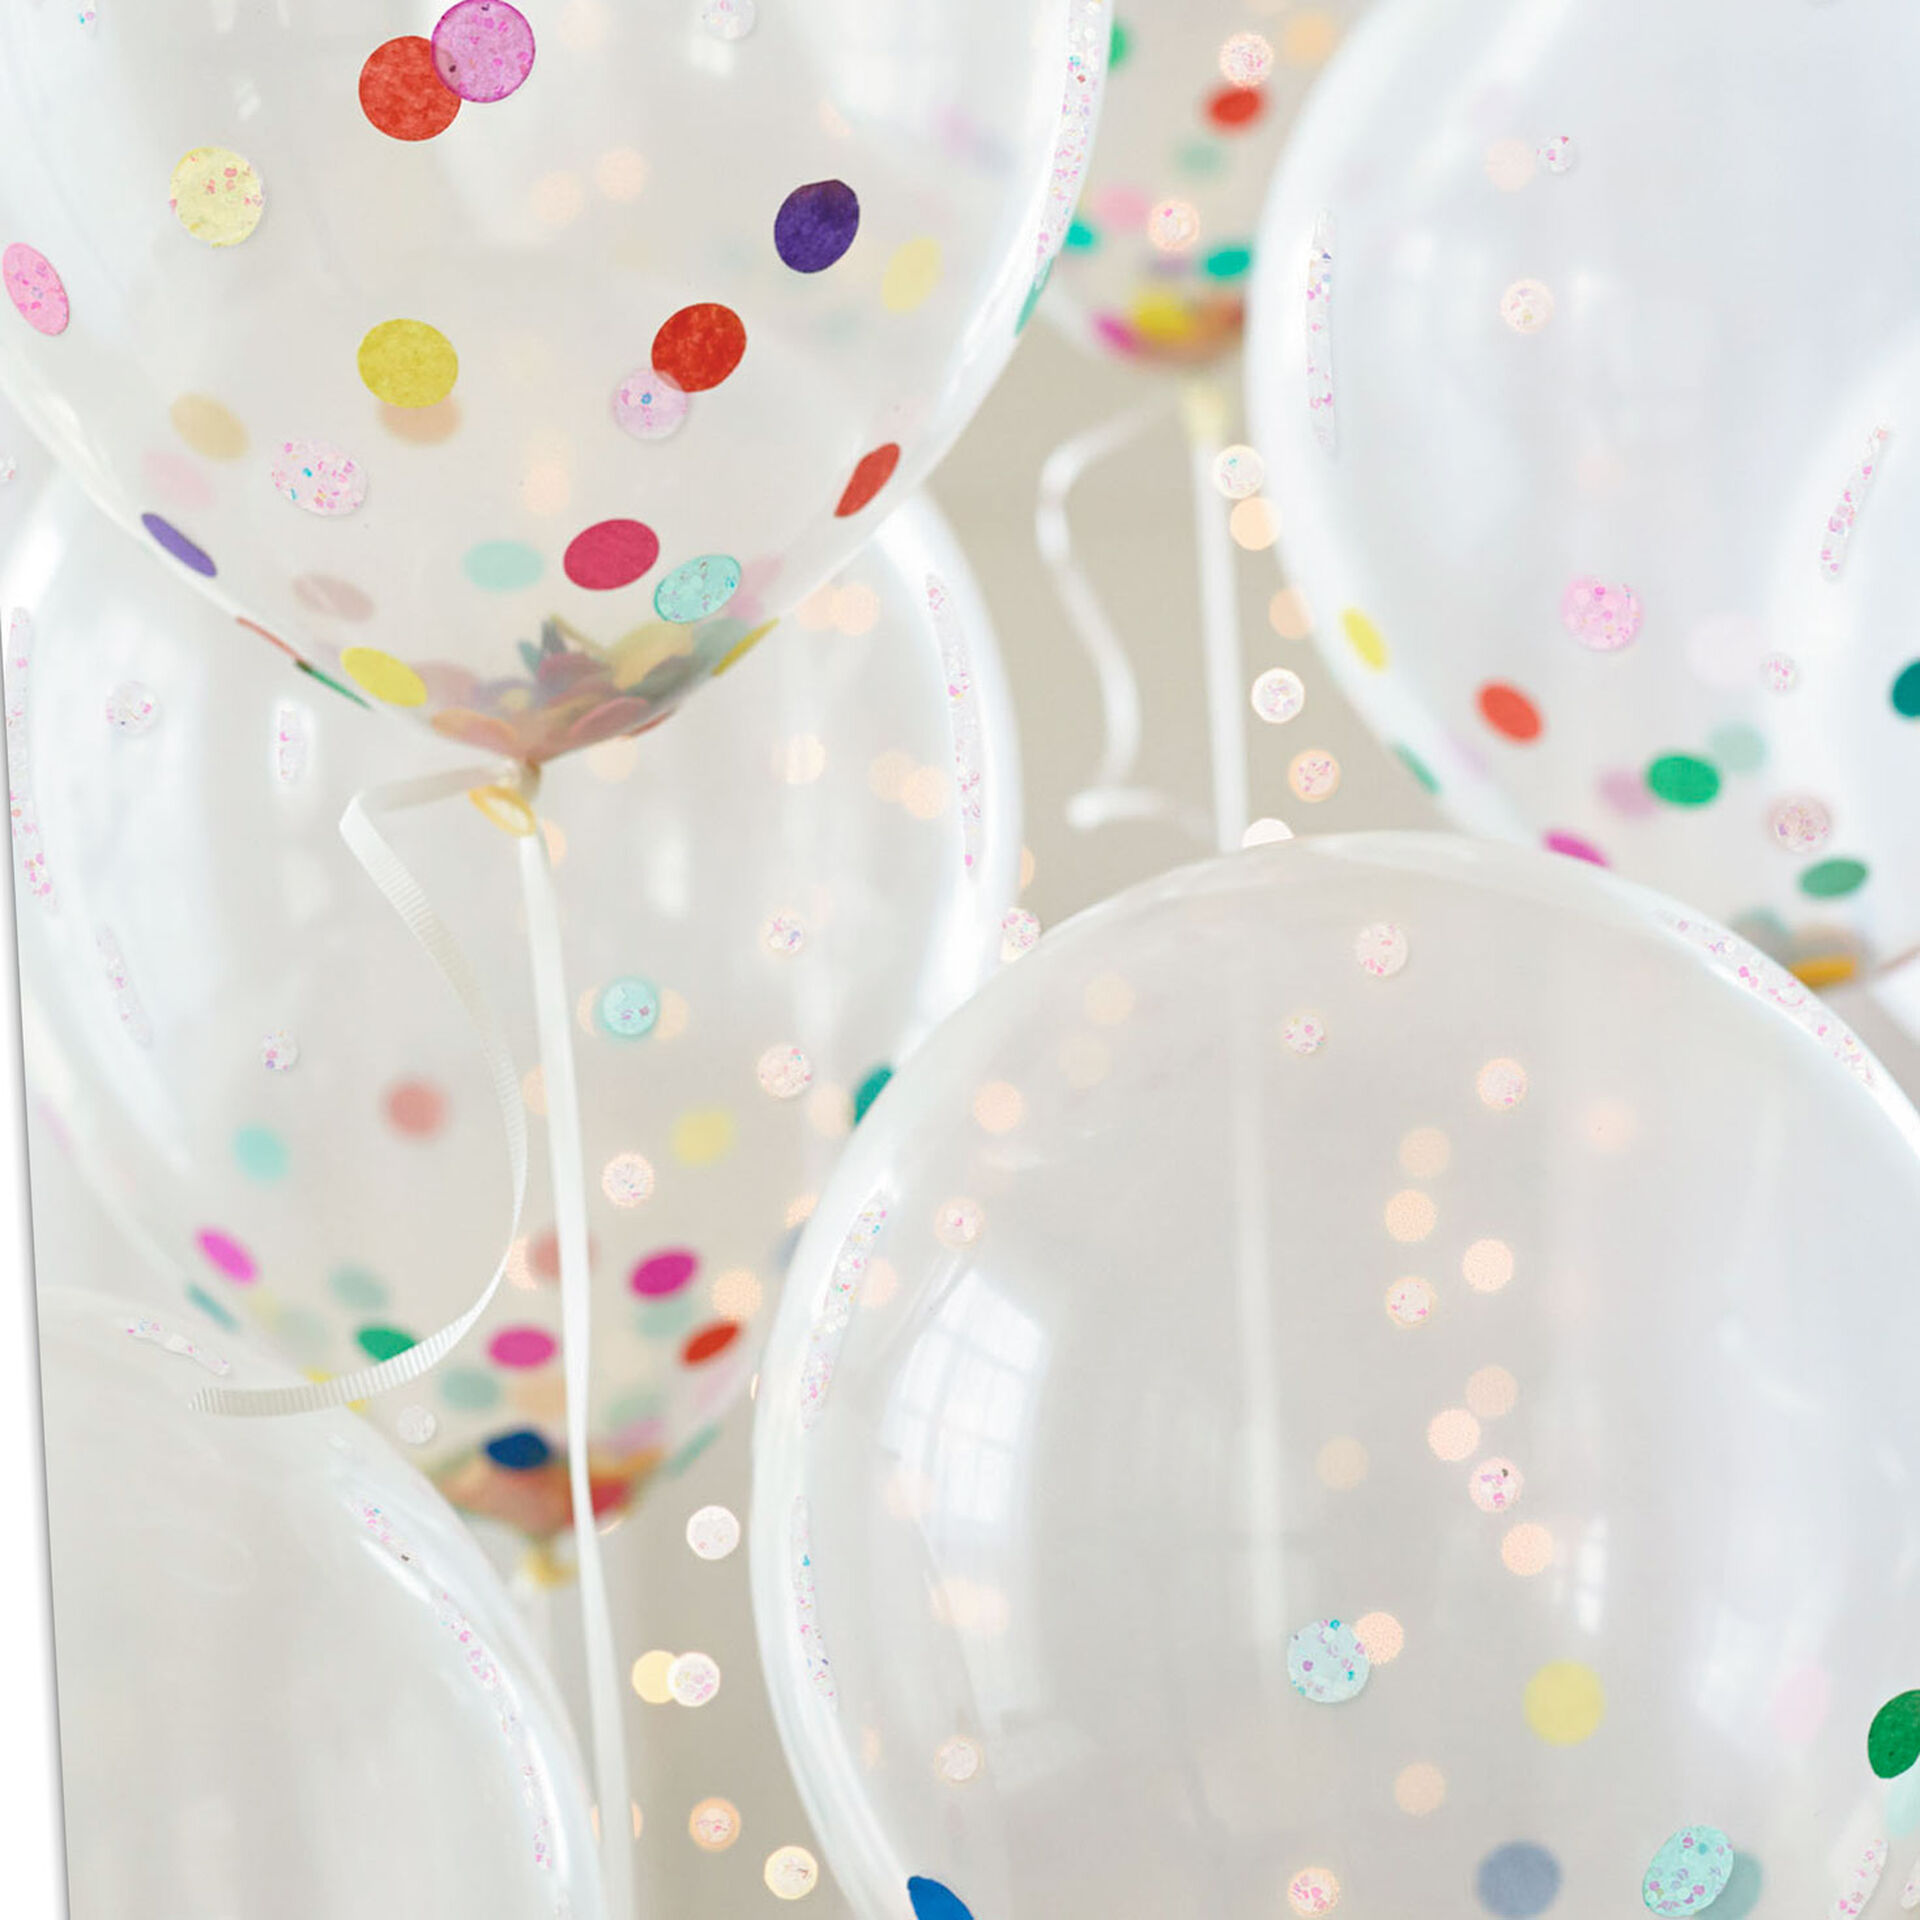 Balloons-Filled-With-Confetti-Blank-Card_299IMP1480_03